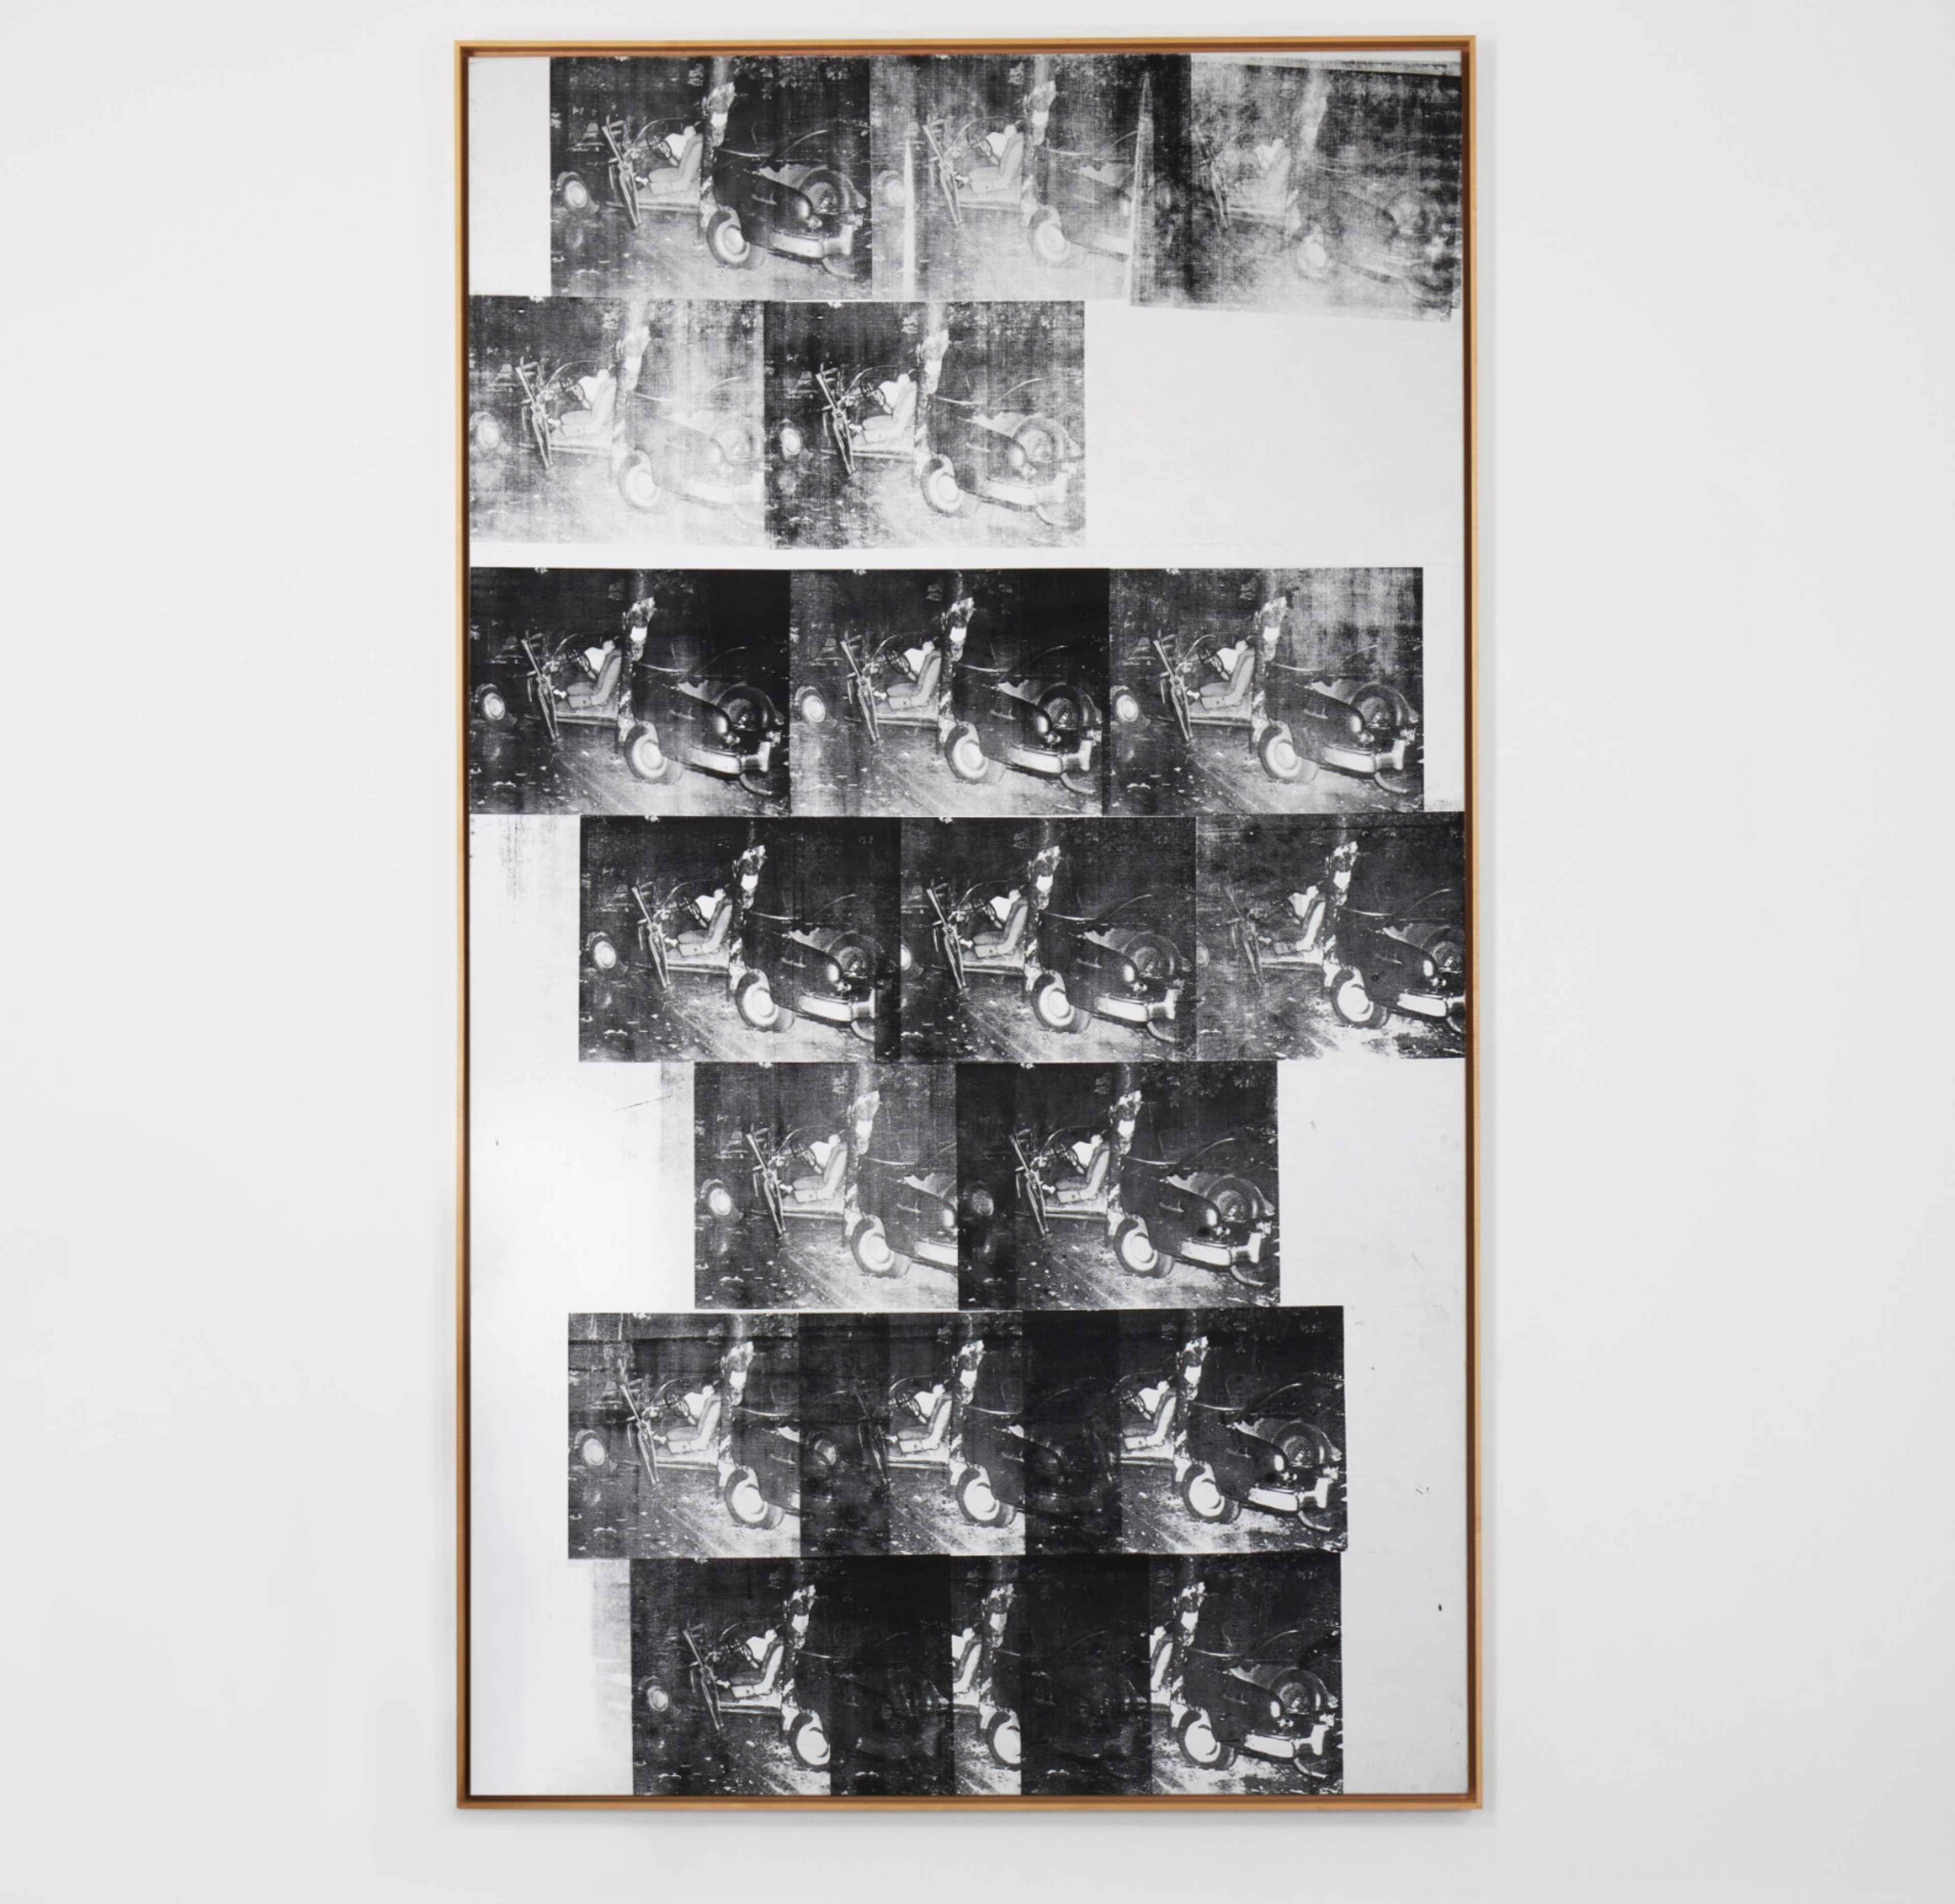 An image of White Disaster by Andy Warhol, a monochrome work showing dozens of repeating images of a car crash.